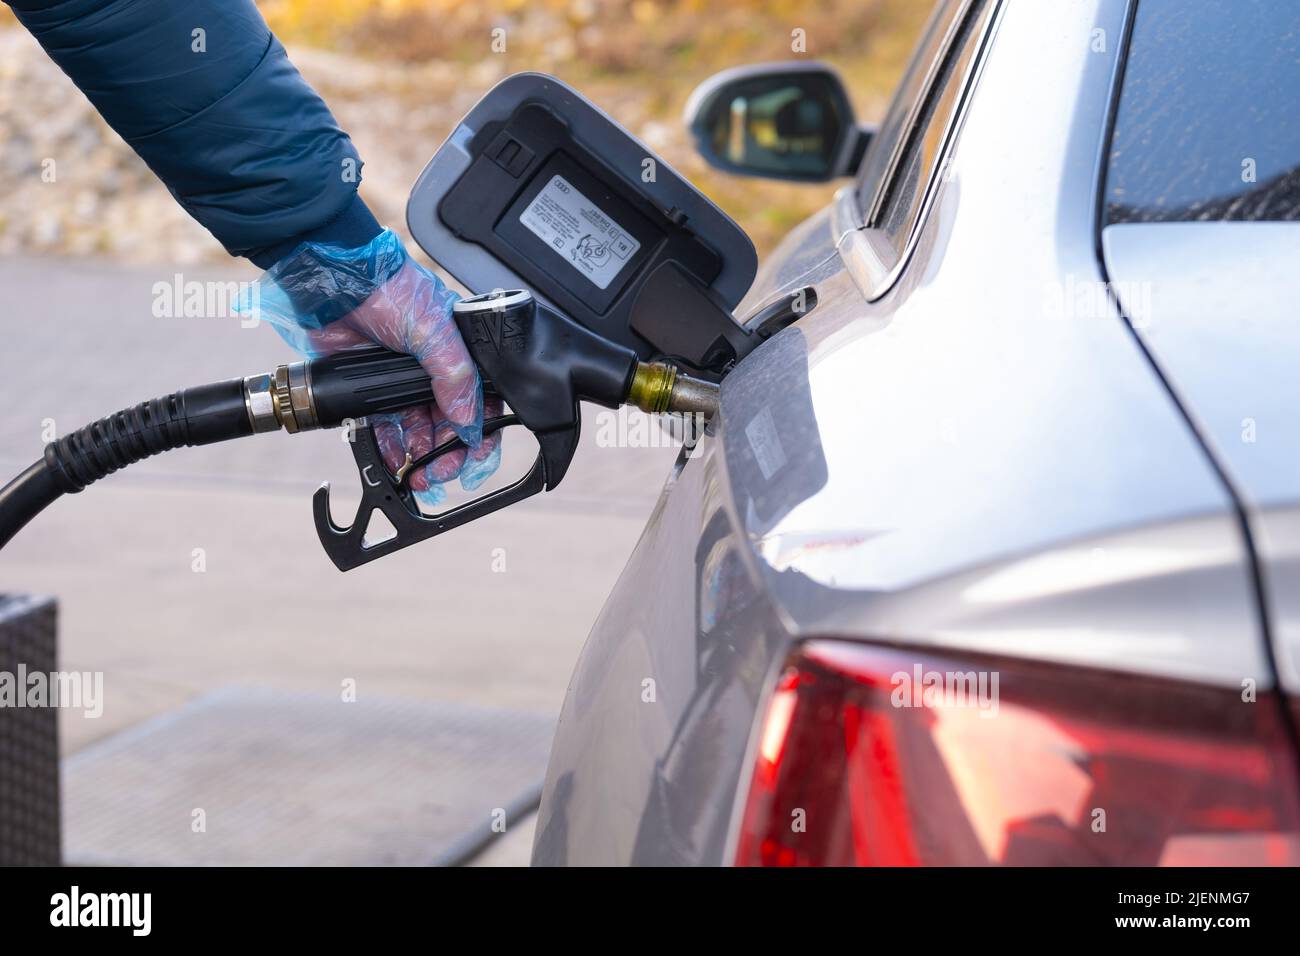 Fuel price in Europe. Refueling the car.Refueling pistol in the hands of a man in a glove.Car at a gas station. Silver car, refueling pistols and Stock Photo